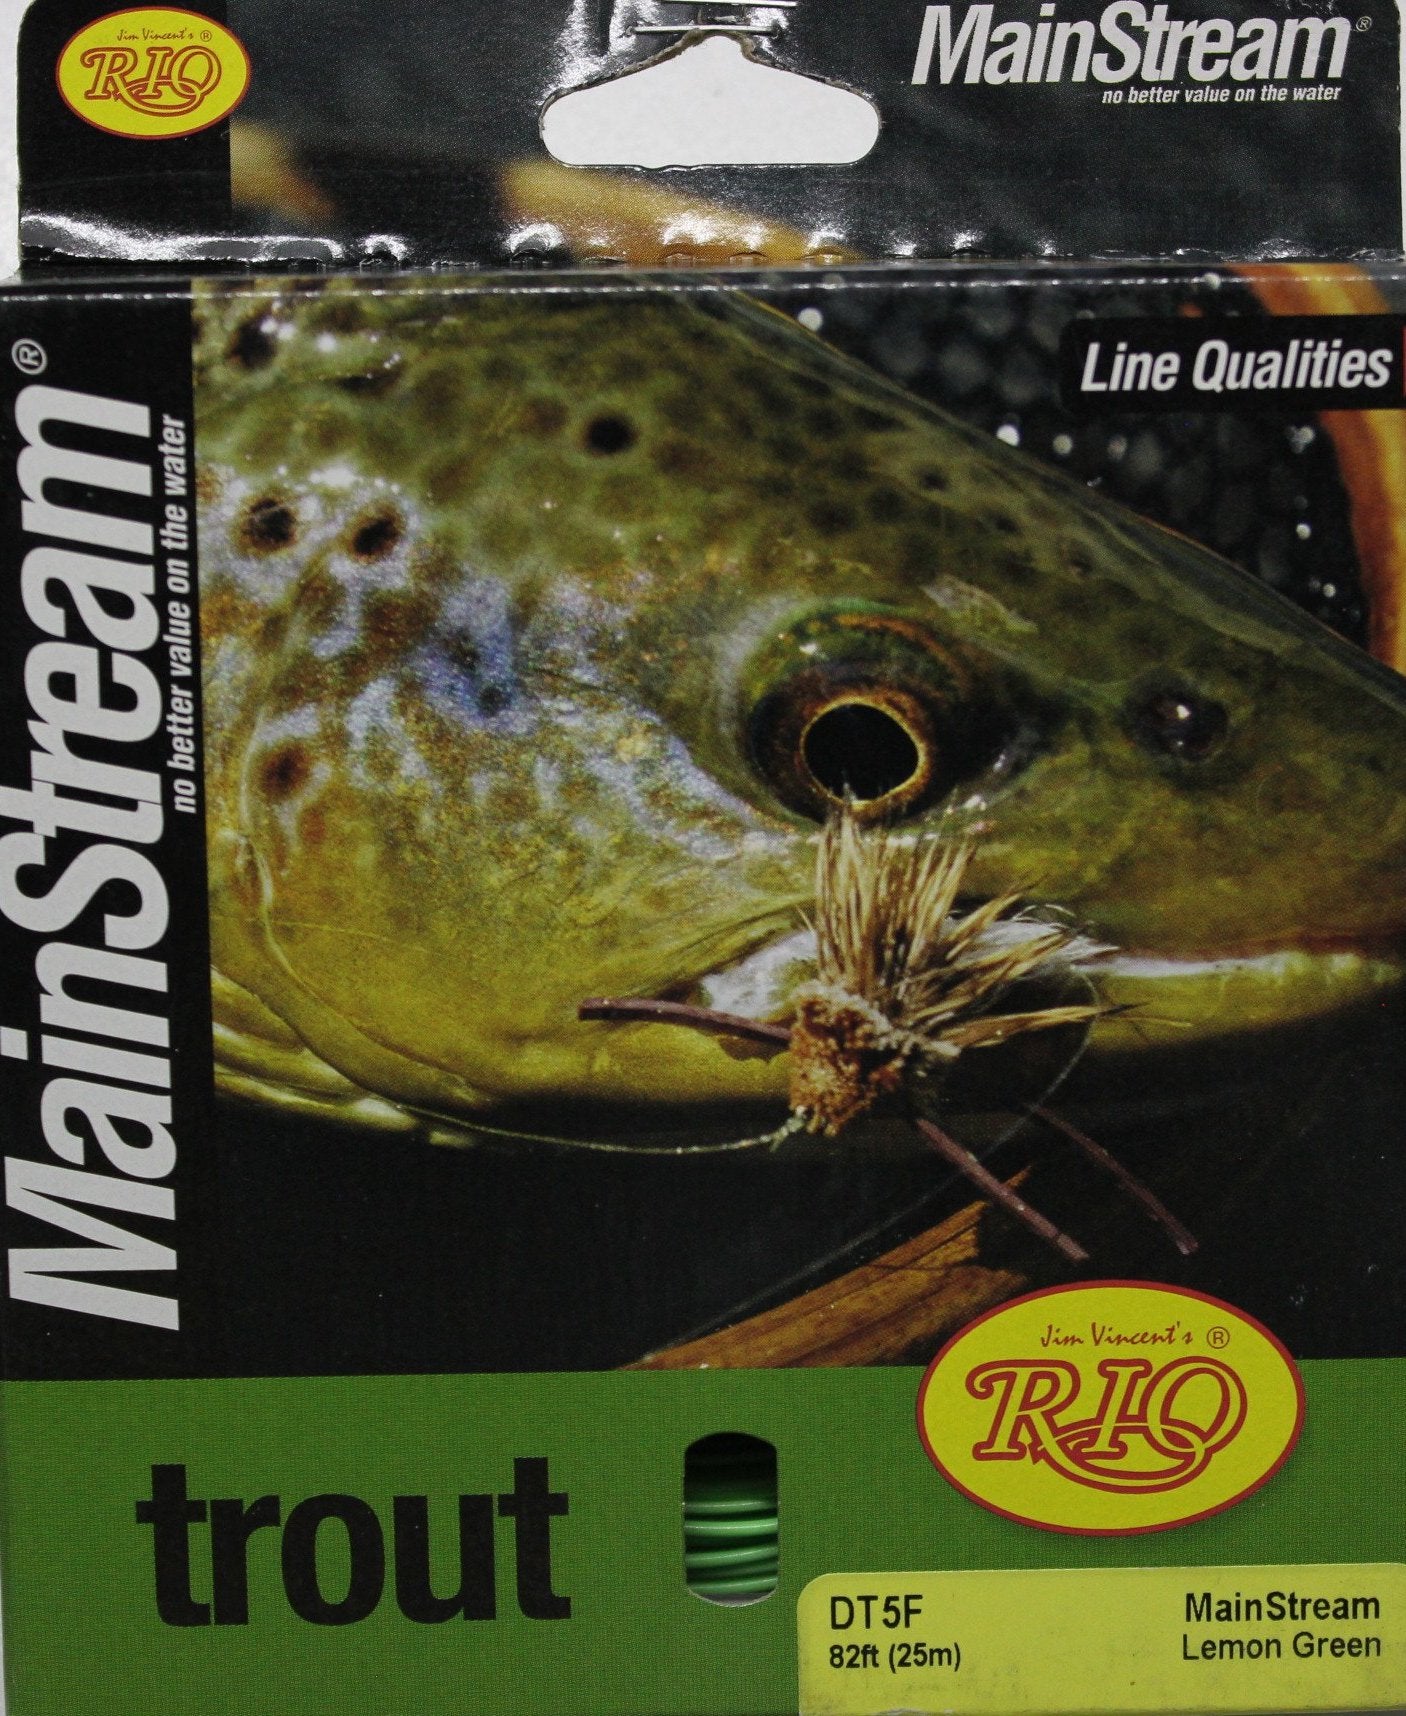 RIO Mainstream Trout Double Tapper Fly Line – Ultimate Fishing and Outdoors